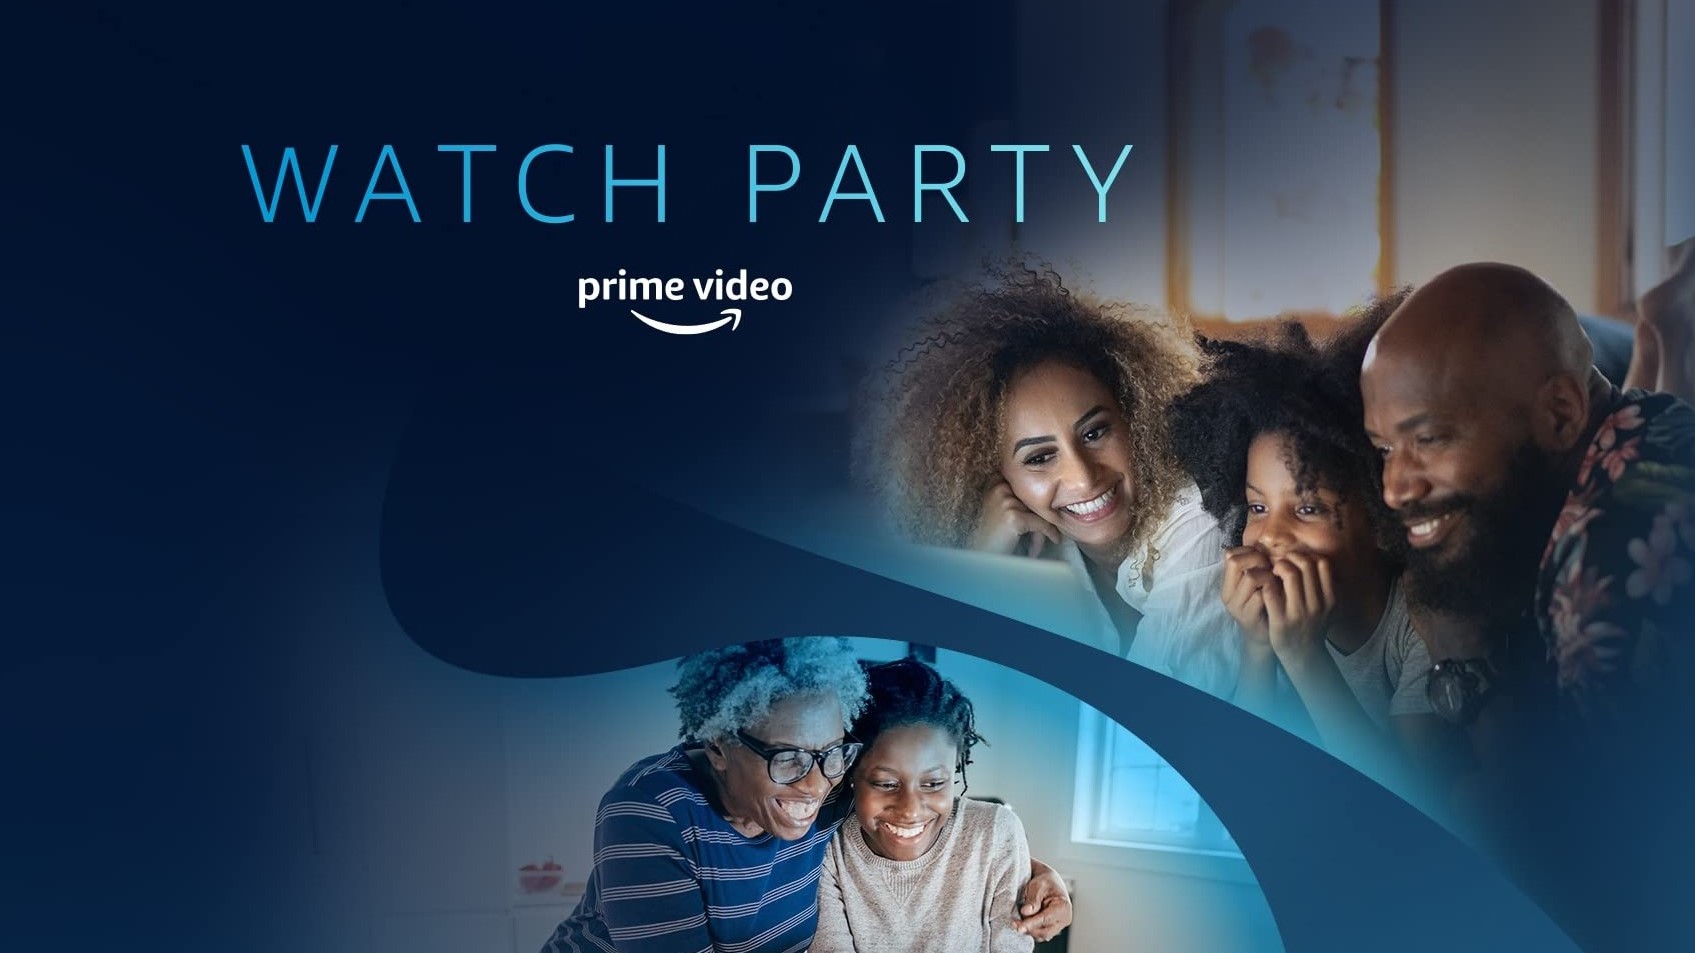 An image promoting the Amazon Prime Video Watch Party